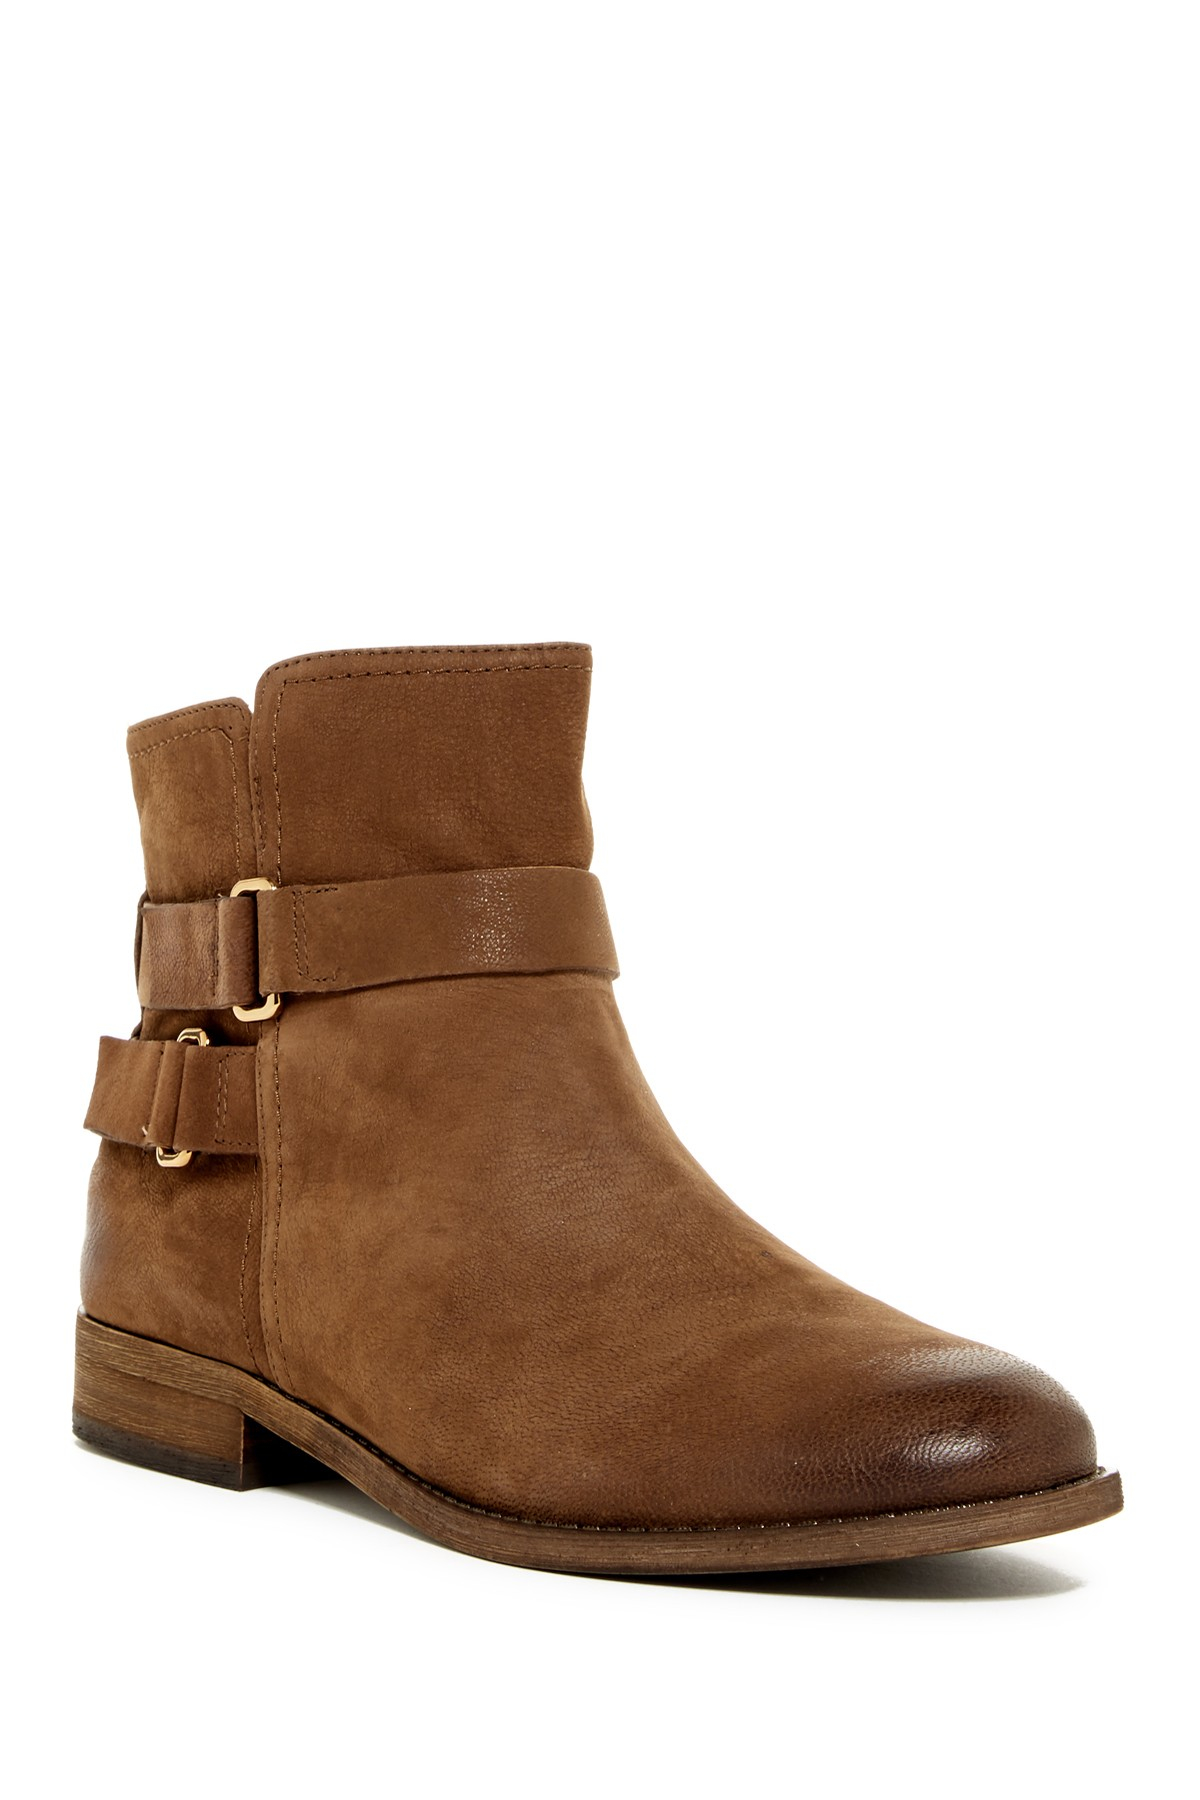 Franco sarto Kacey Leather Ankle Boots in Brown | Lyst